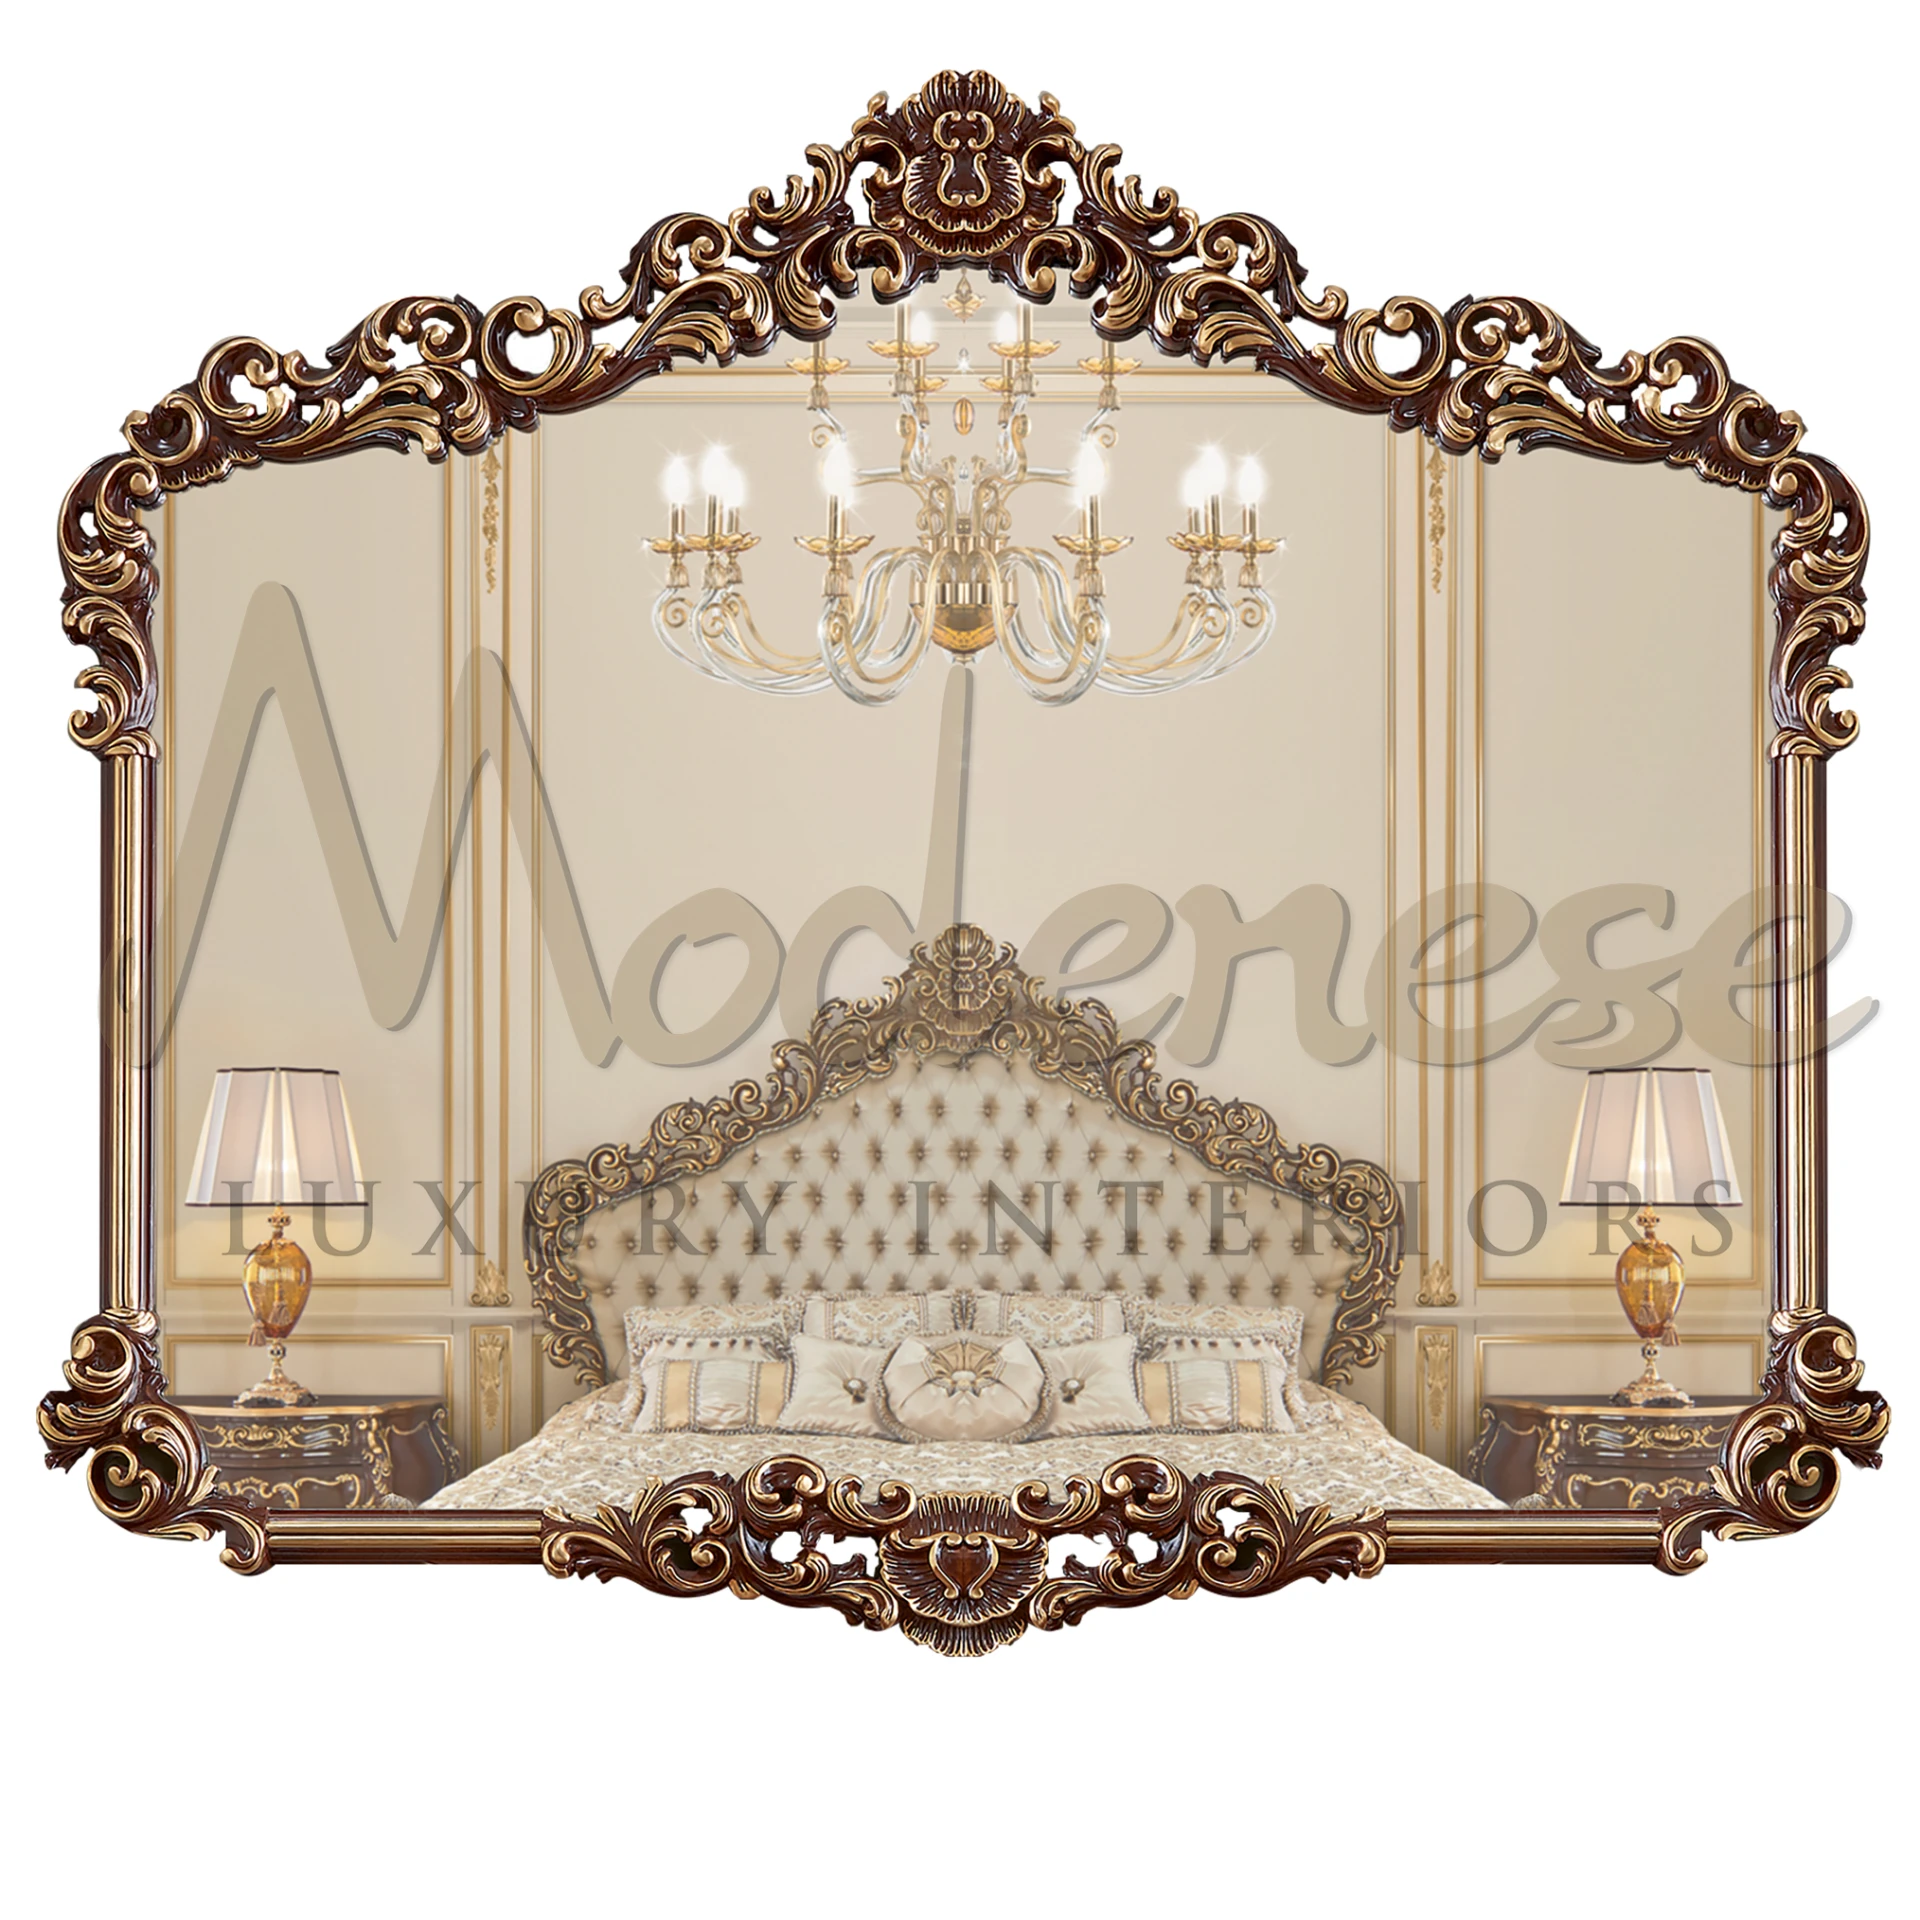 Rococo Style Wall Mirror with intricate carvings, embodying 18th-century French elegance and luxury.